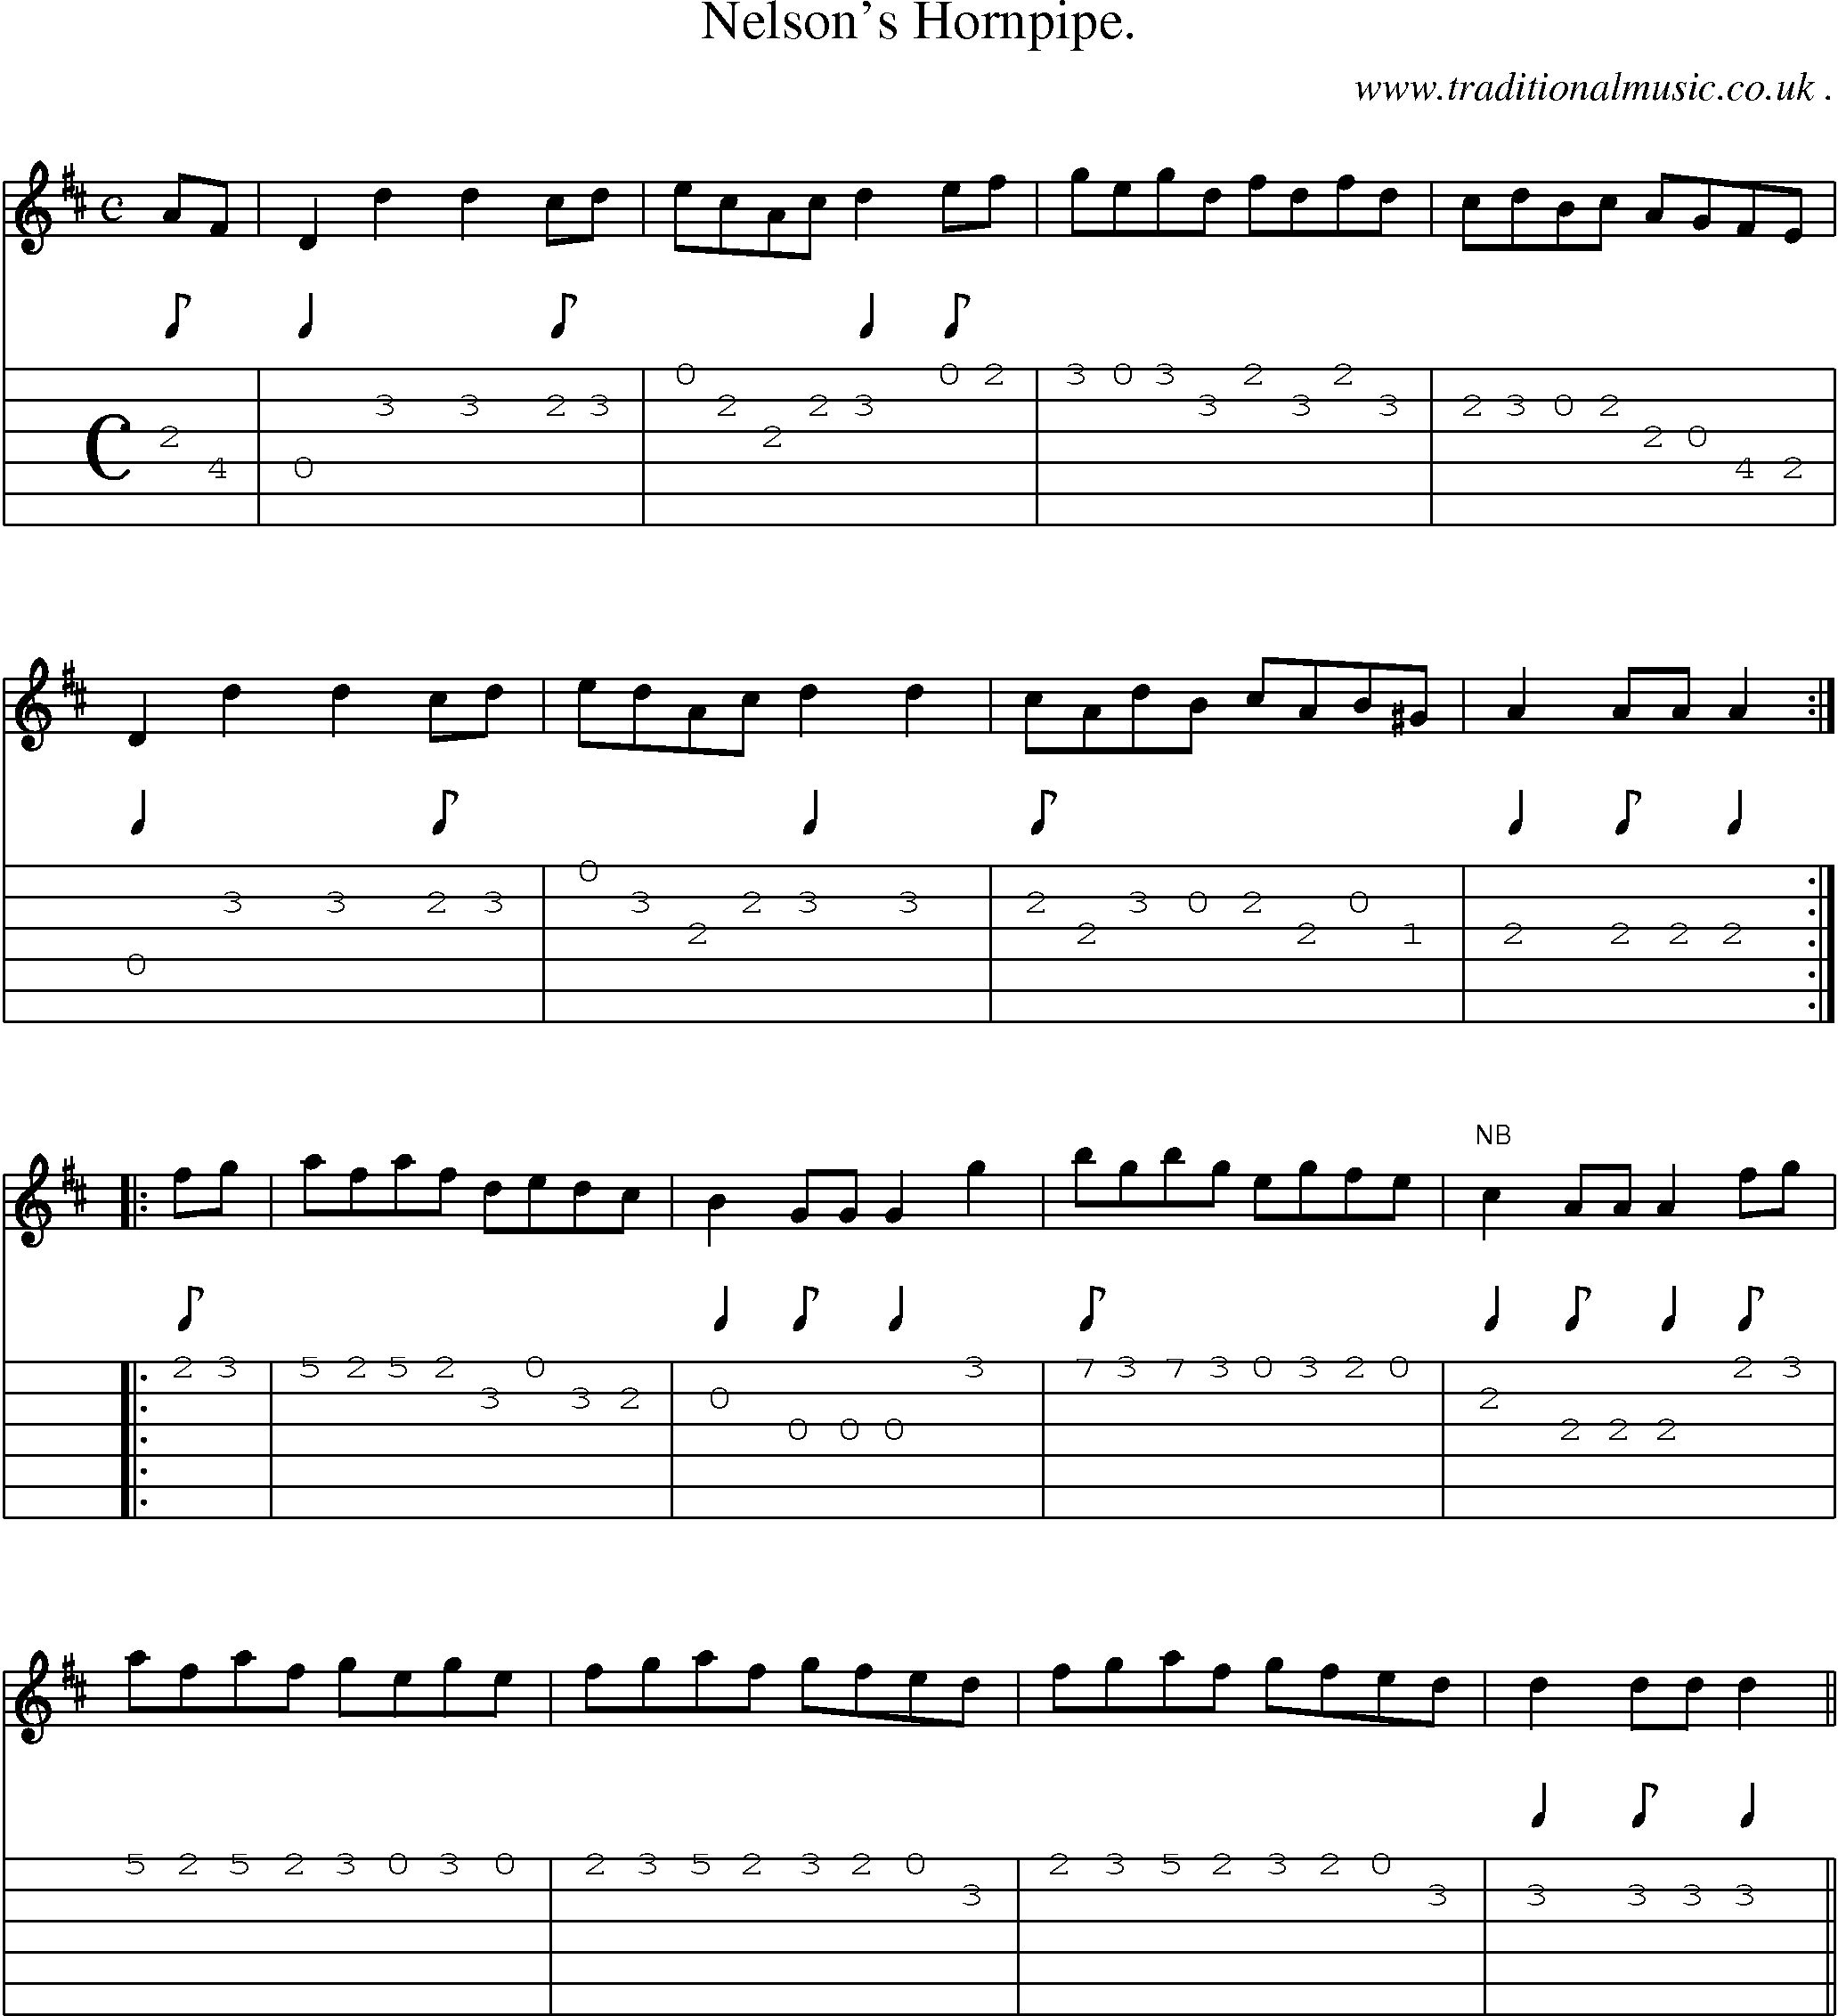 Sheet-Music and Guitar Tabs for Nelsons Hornpipe